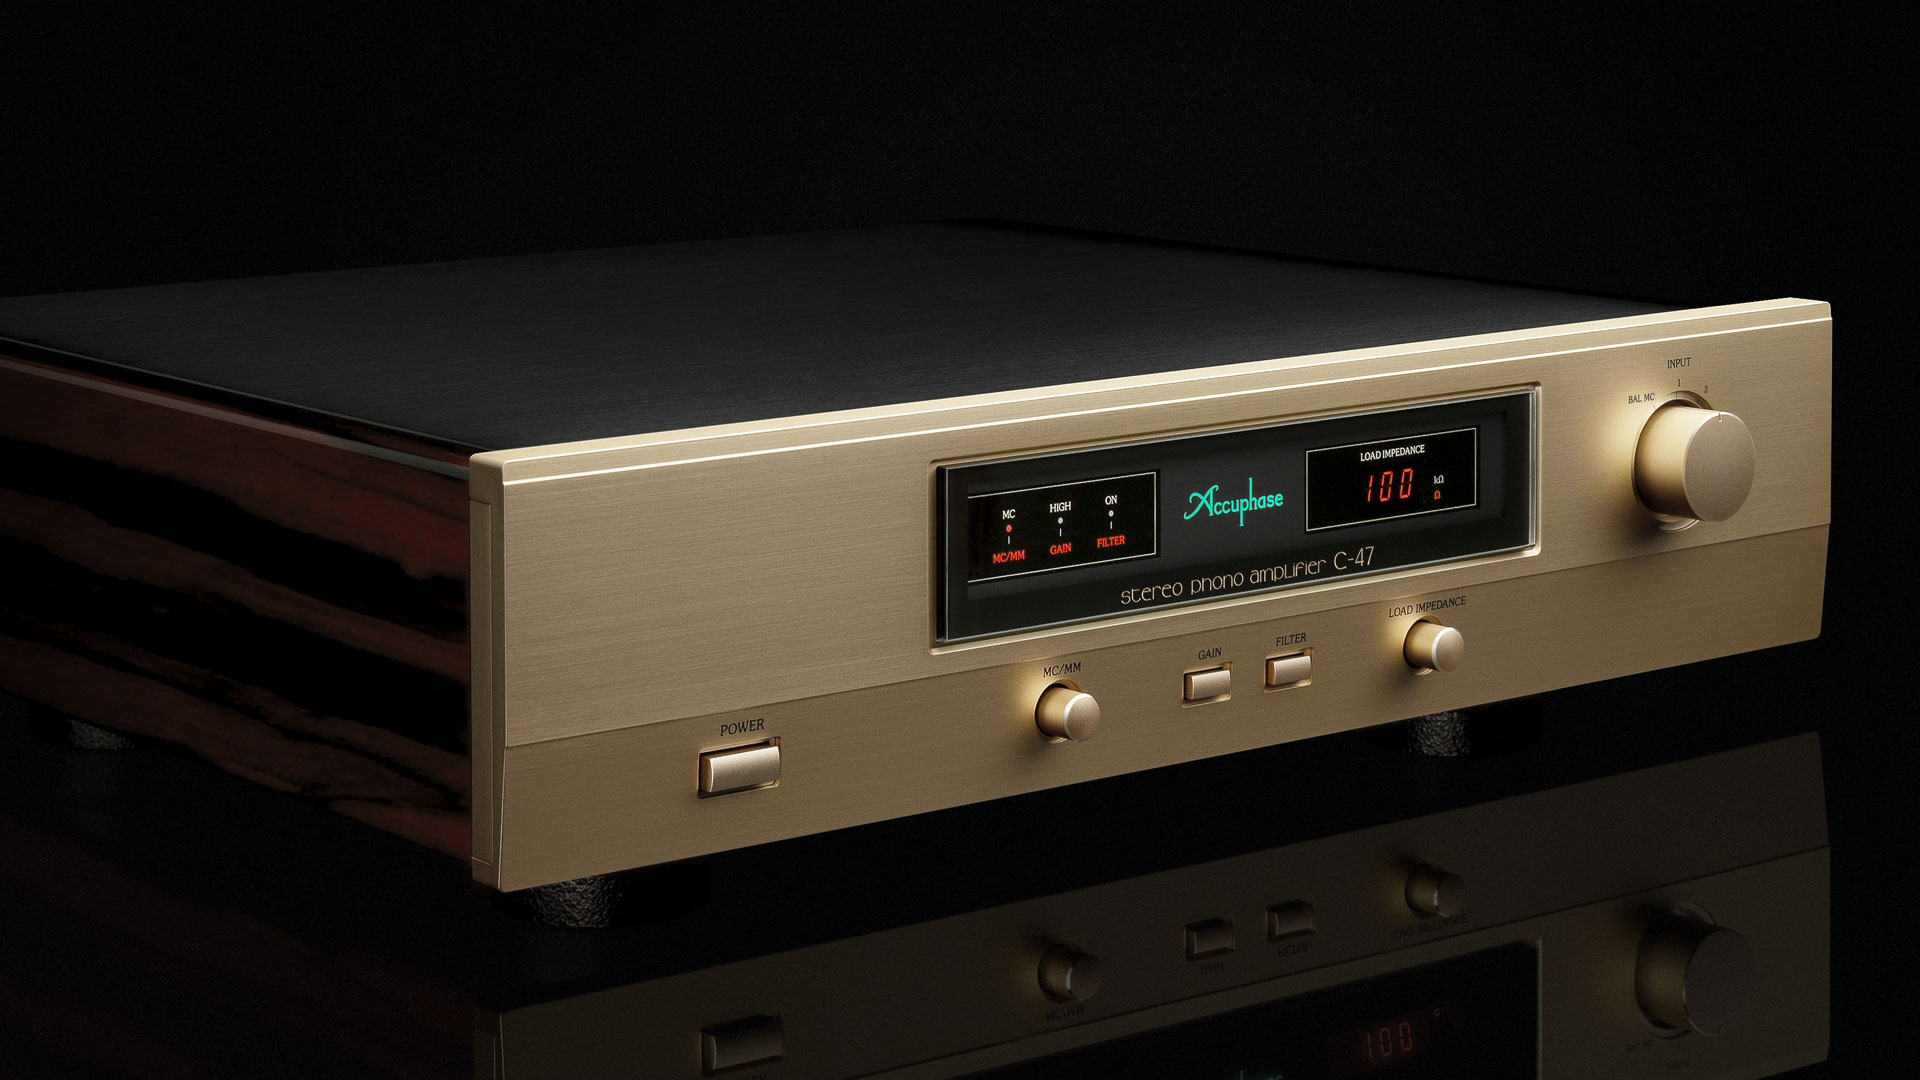 Accuphase C-47 (Image Credit: Accuphase)